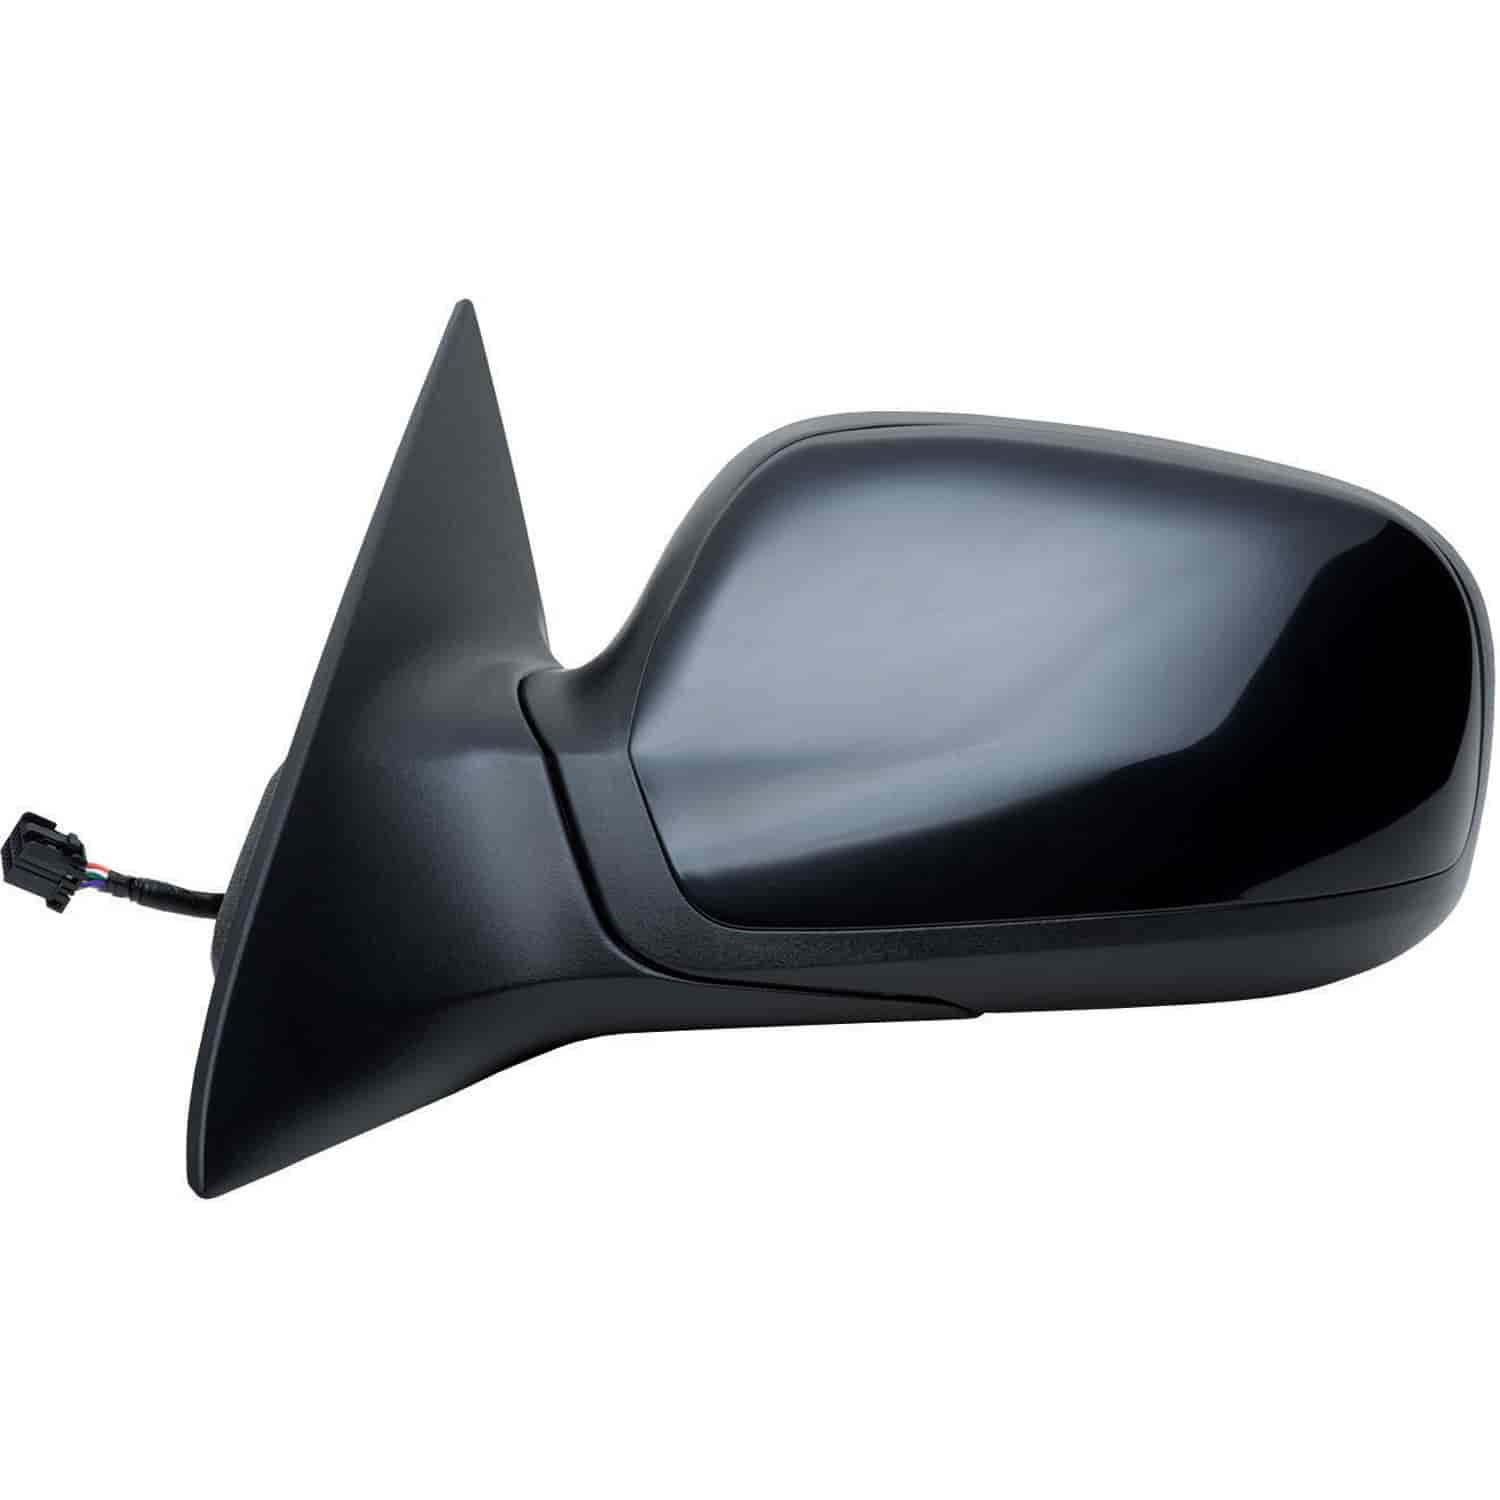 OEM Style Replacement mirror for 06-08 Chrysler Pacifica code GTS driver side mirror tested to fit a